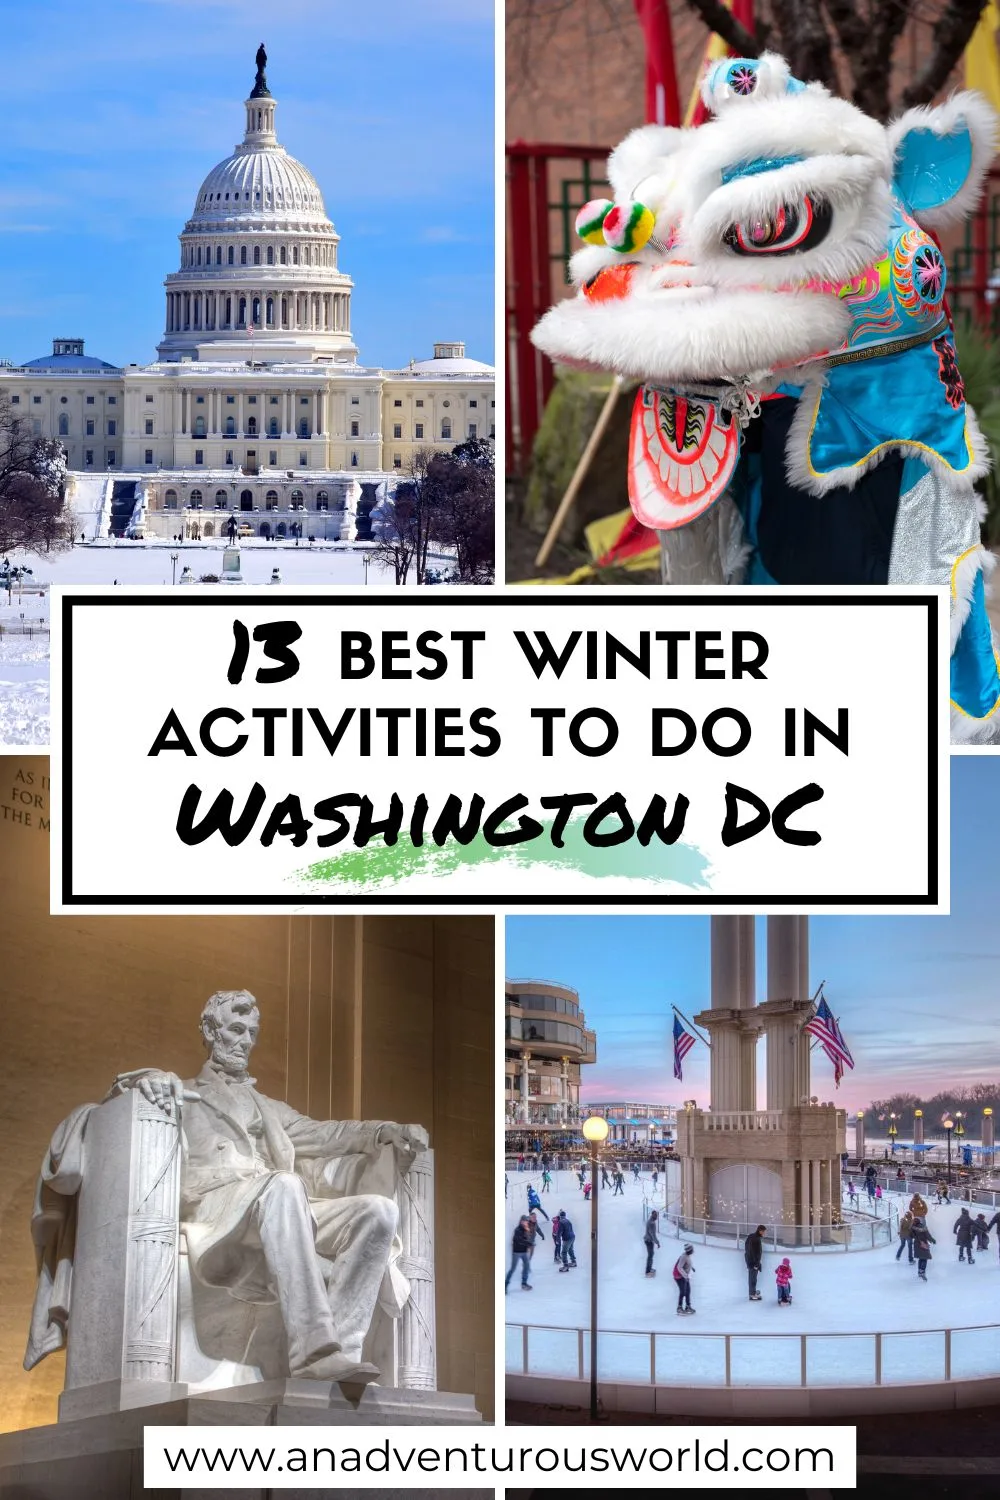 13 BEST Things to do in Washington DC in Winter